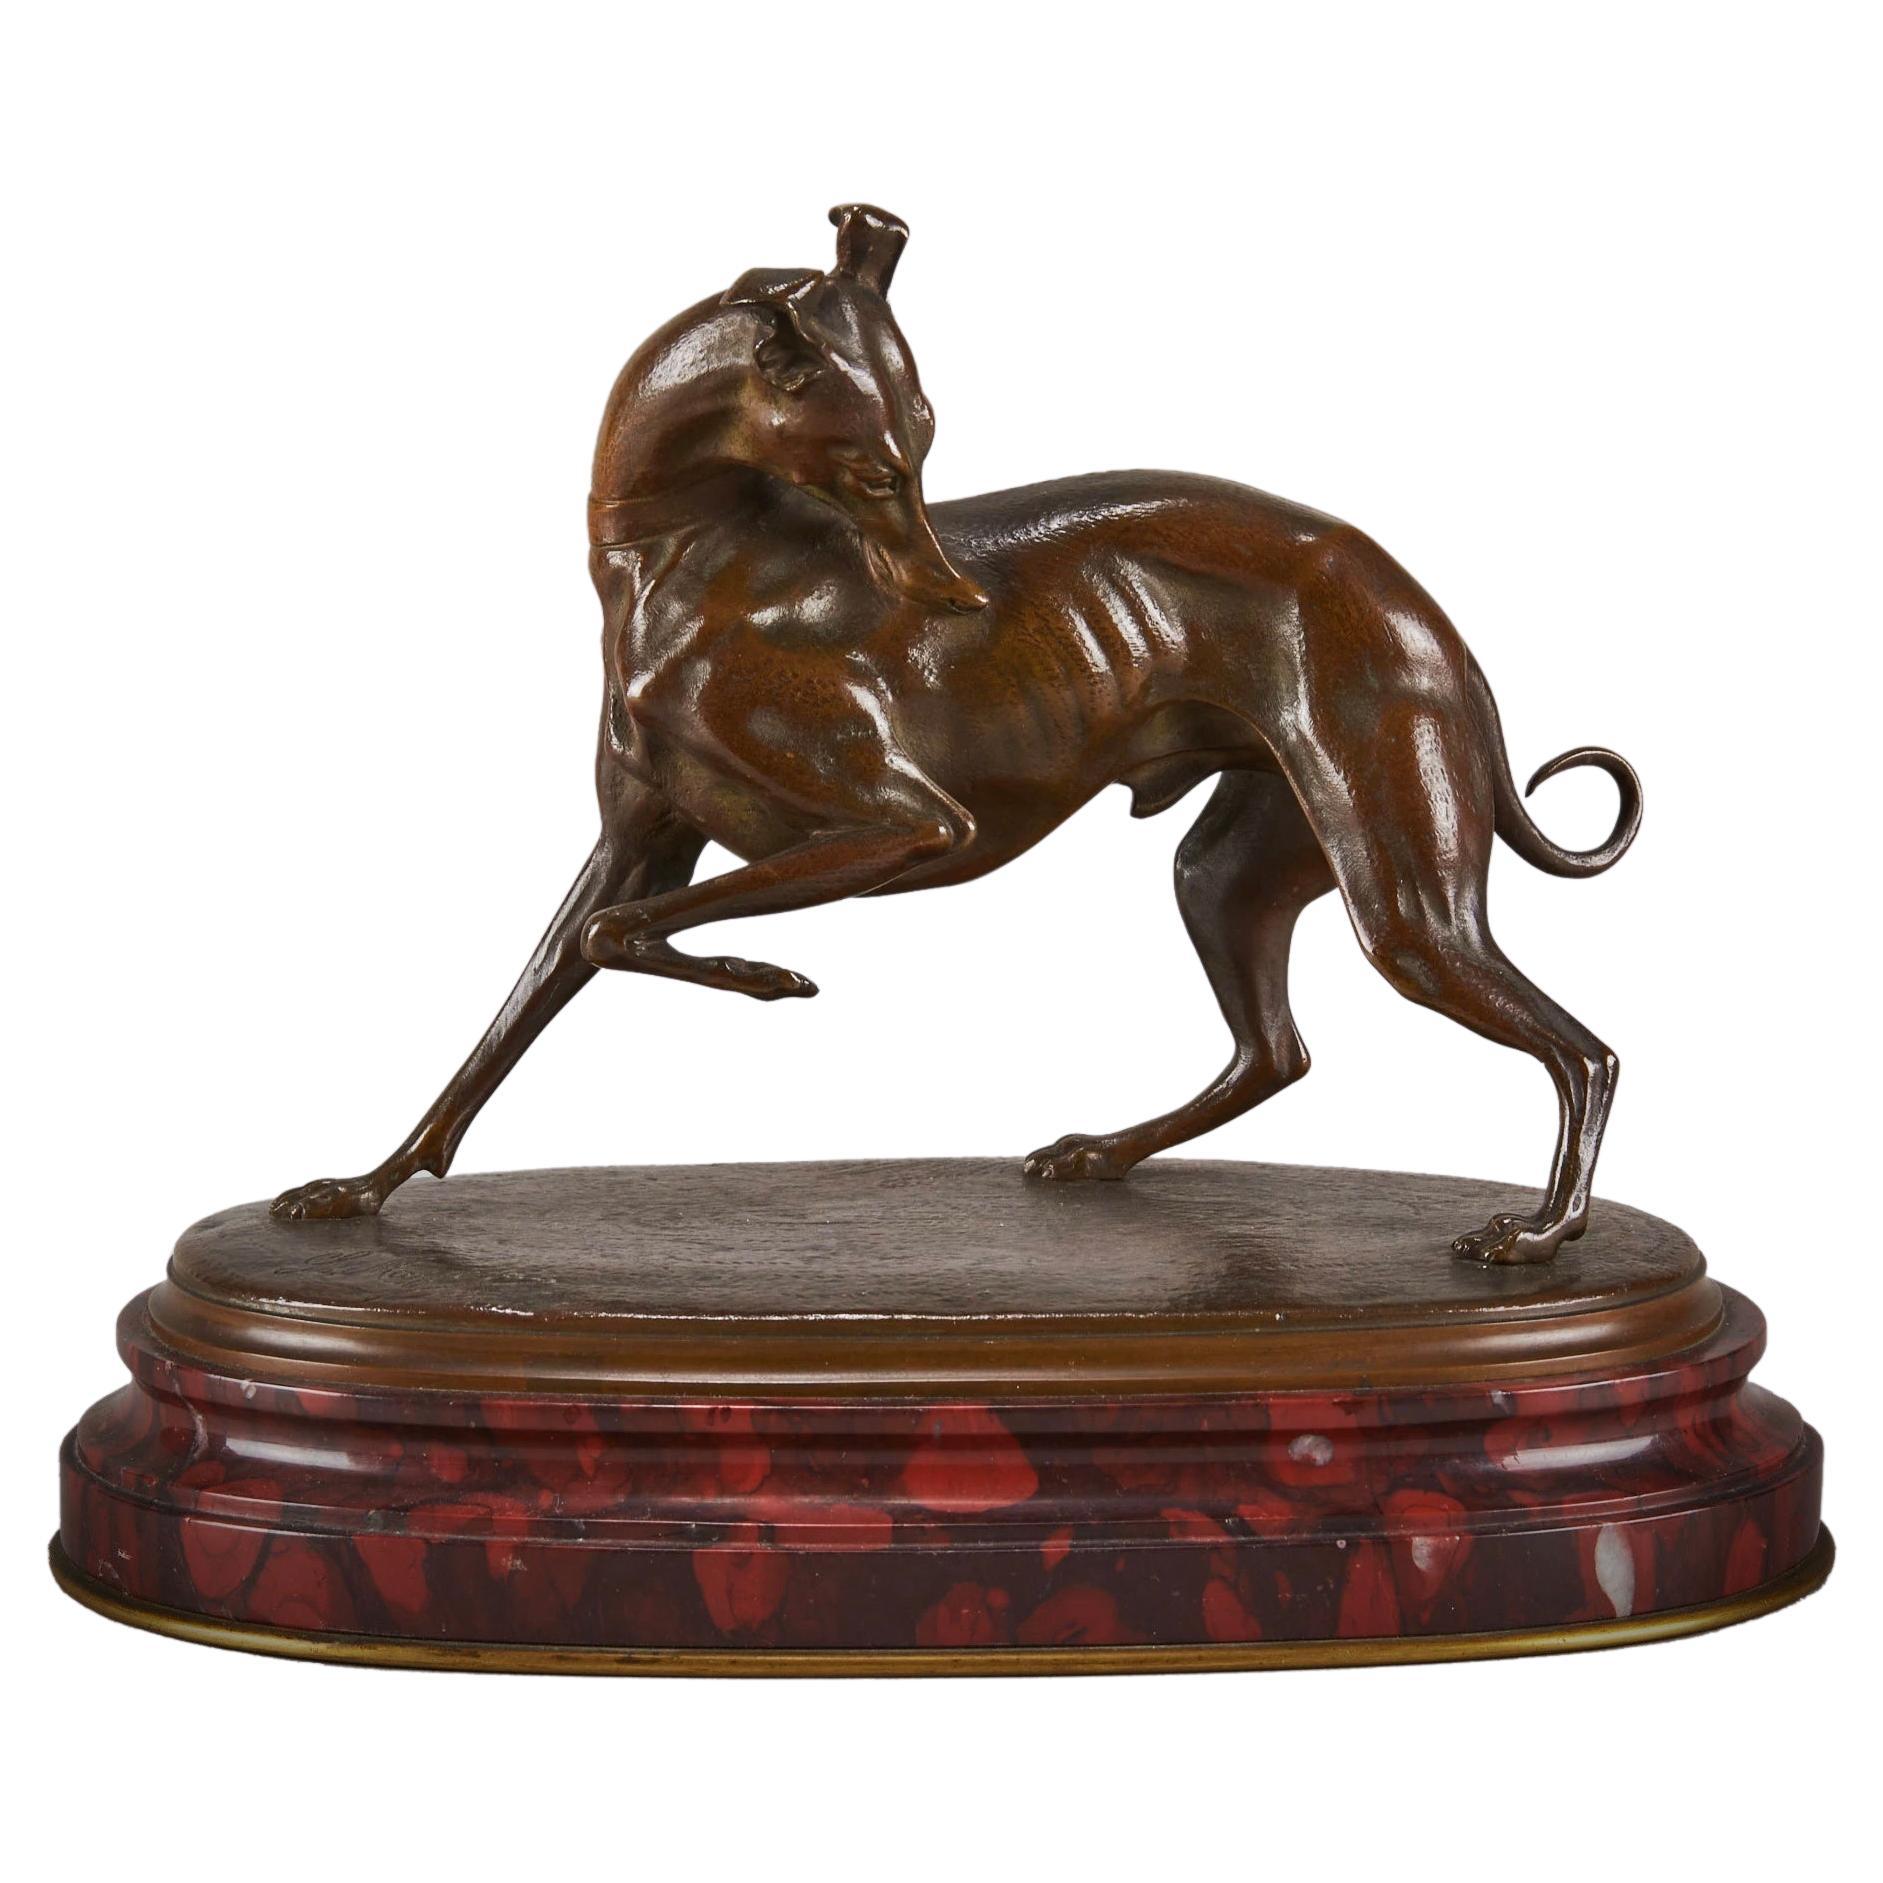 Late-19th Century French Animalier Bronze Entitled "Turning Whippet" by L Mayer For Sale